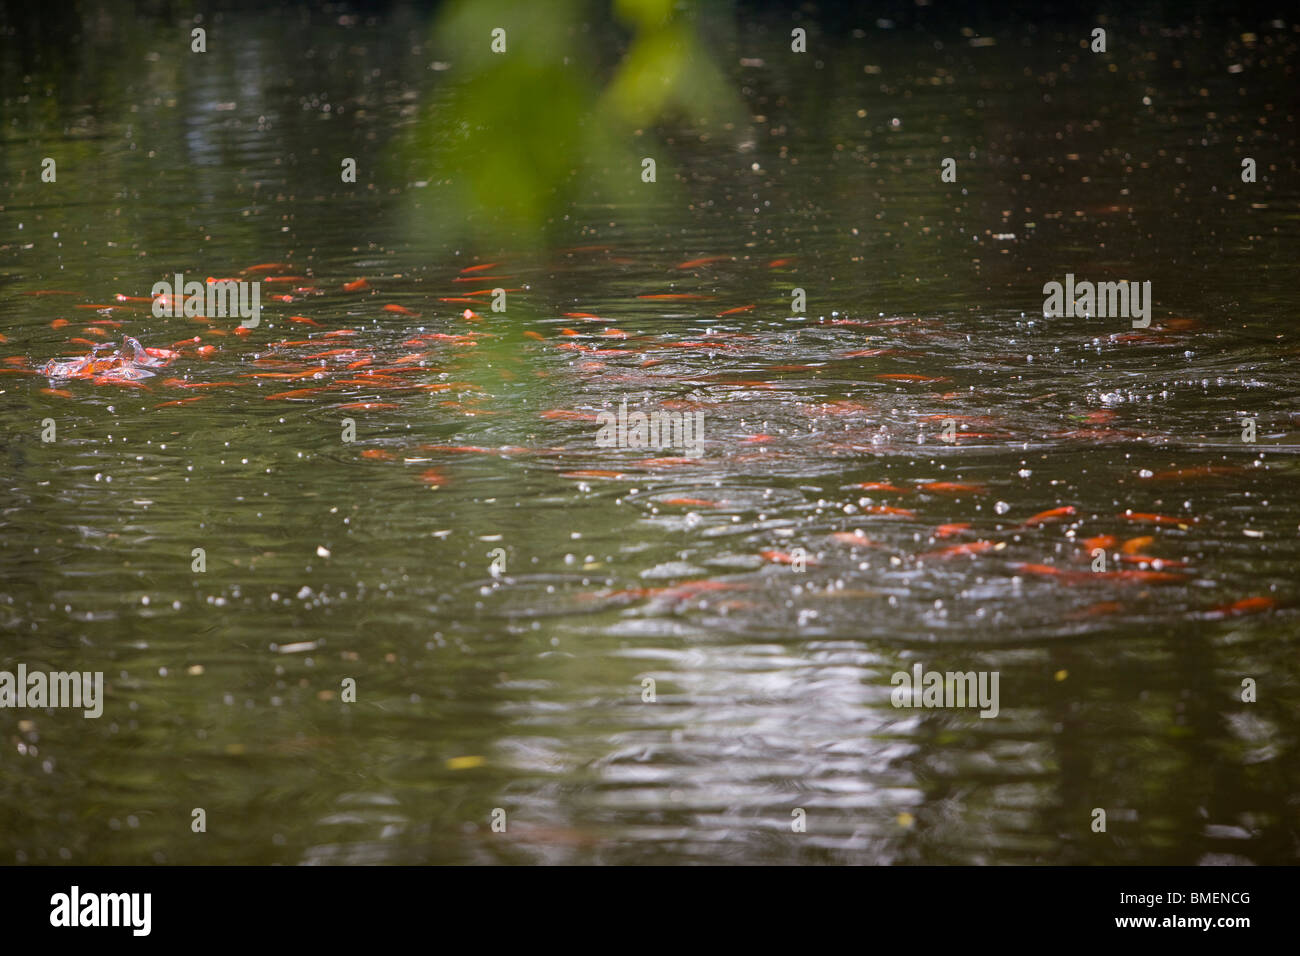 A school of Red Carp in Red Carp Pond, West Lake, Hangzhou City, Zhejiang Province, China Stock Photo